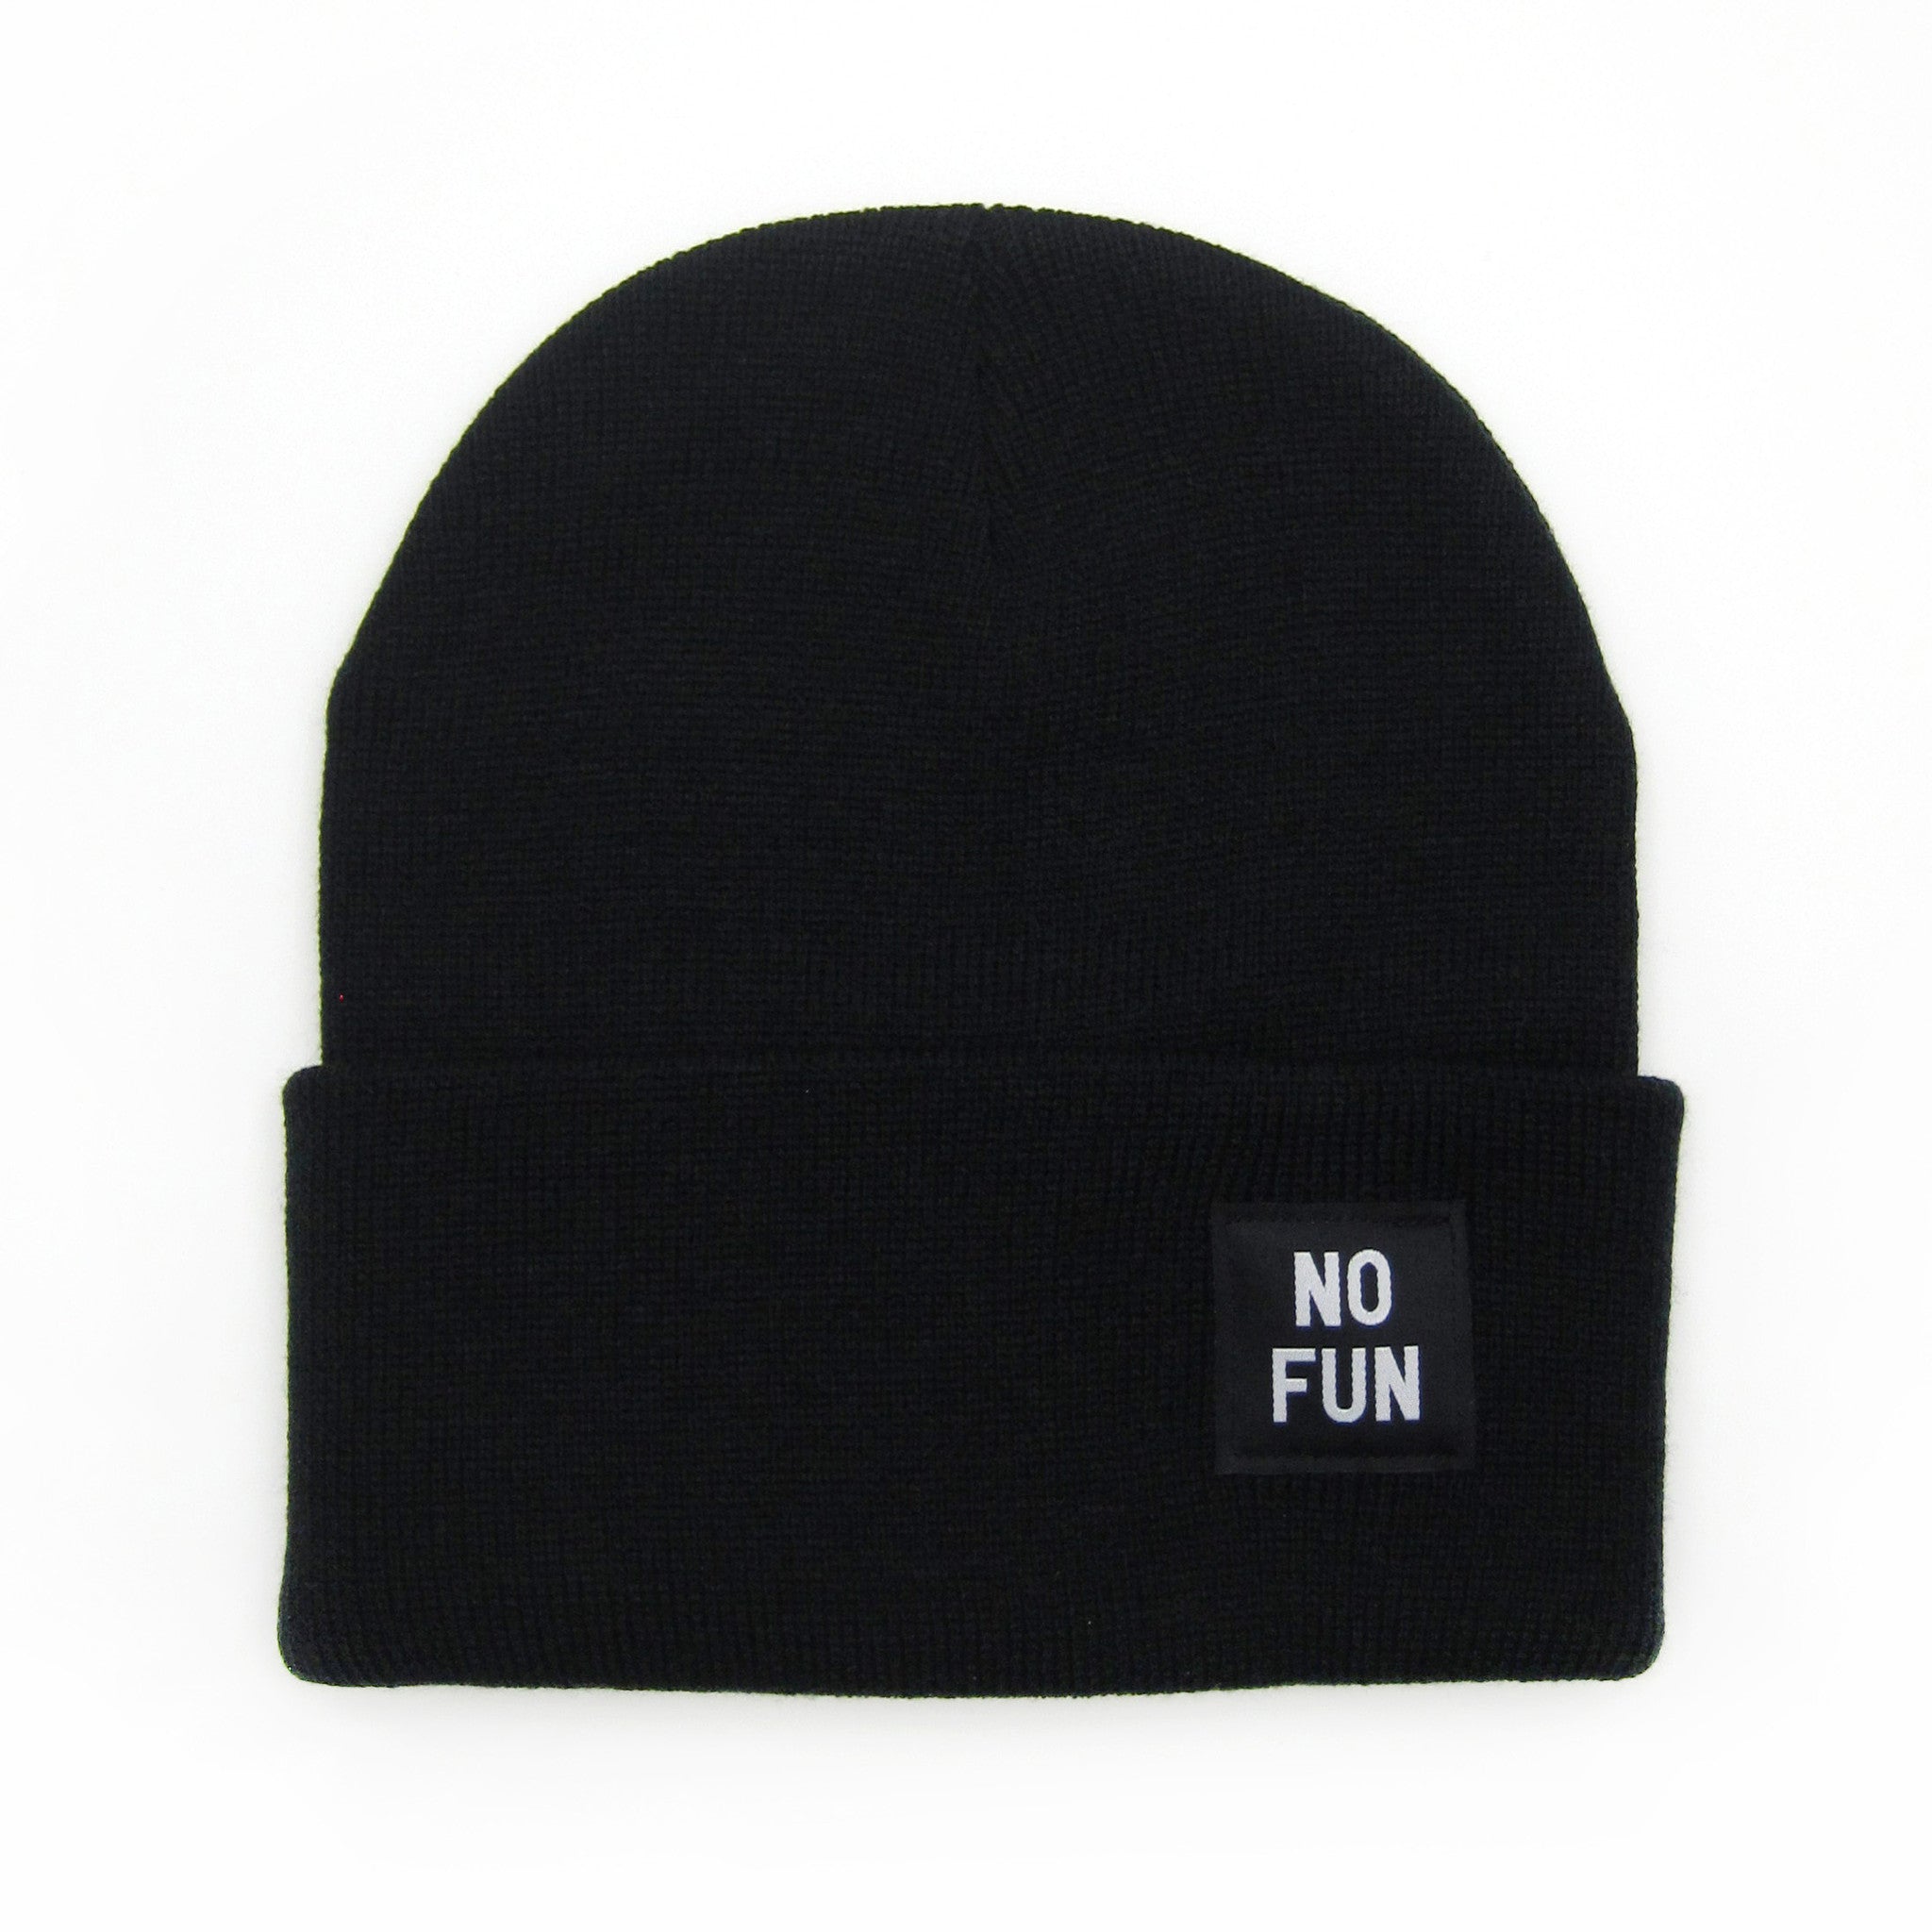 The classic "No Fun" labelled beanie in black.  There is a small, black, woven label that reads "No Fun®" on the cuff.